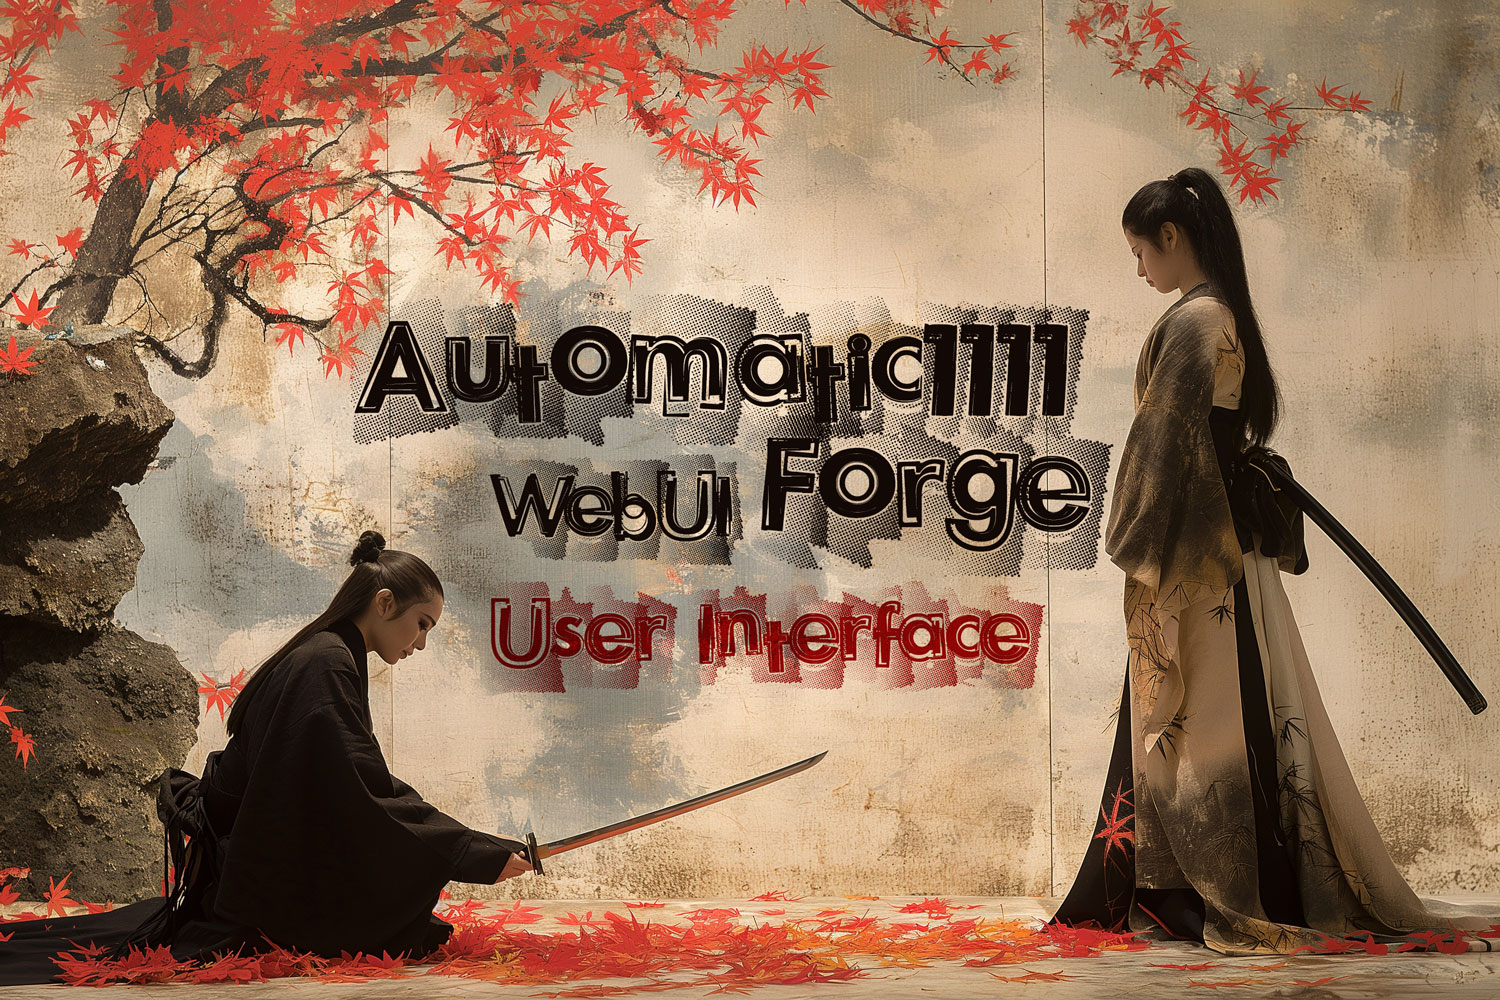 Female student bowing at Samurai Master in feudal japan painting Automatic1111 User Interface, WebUI Forge User Interface